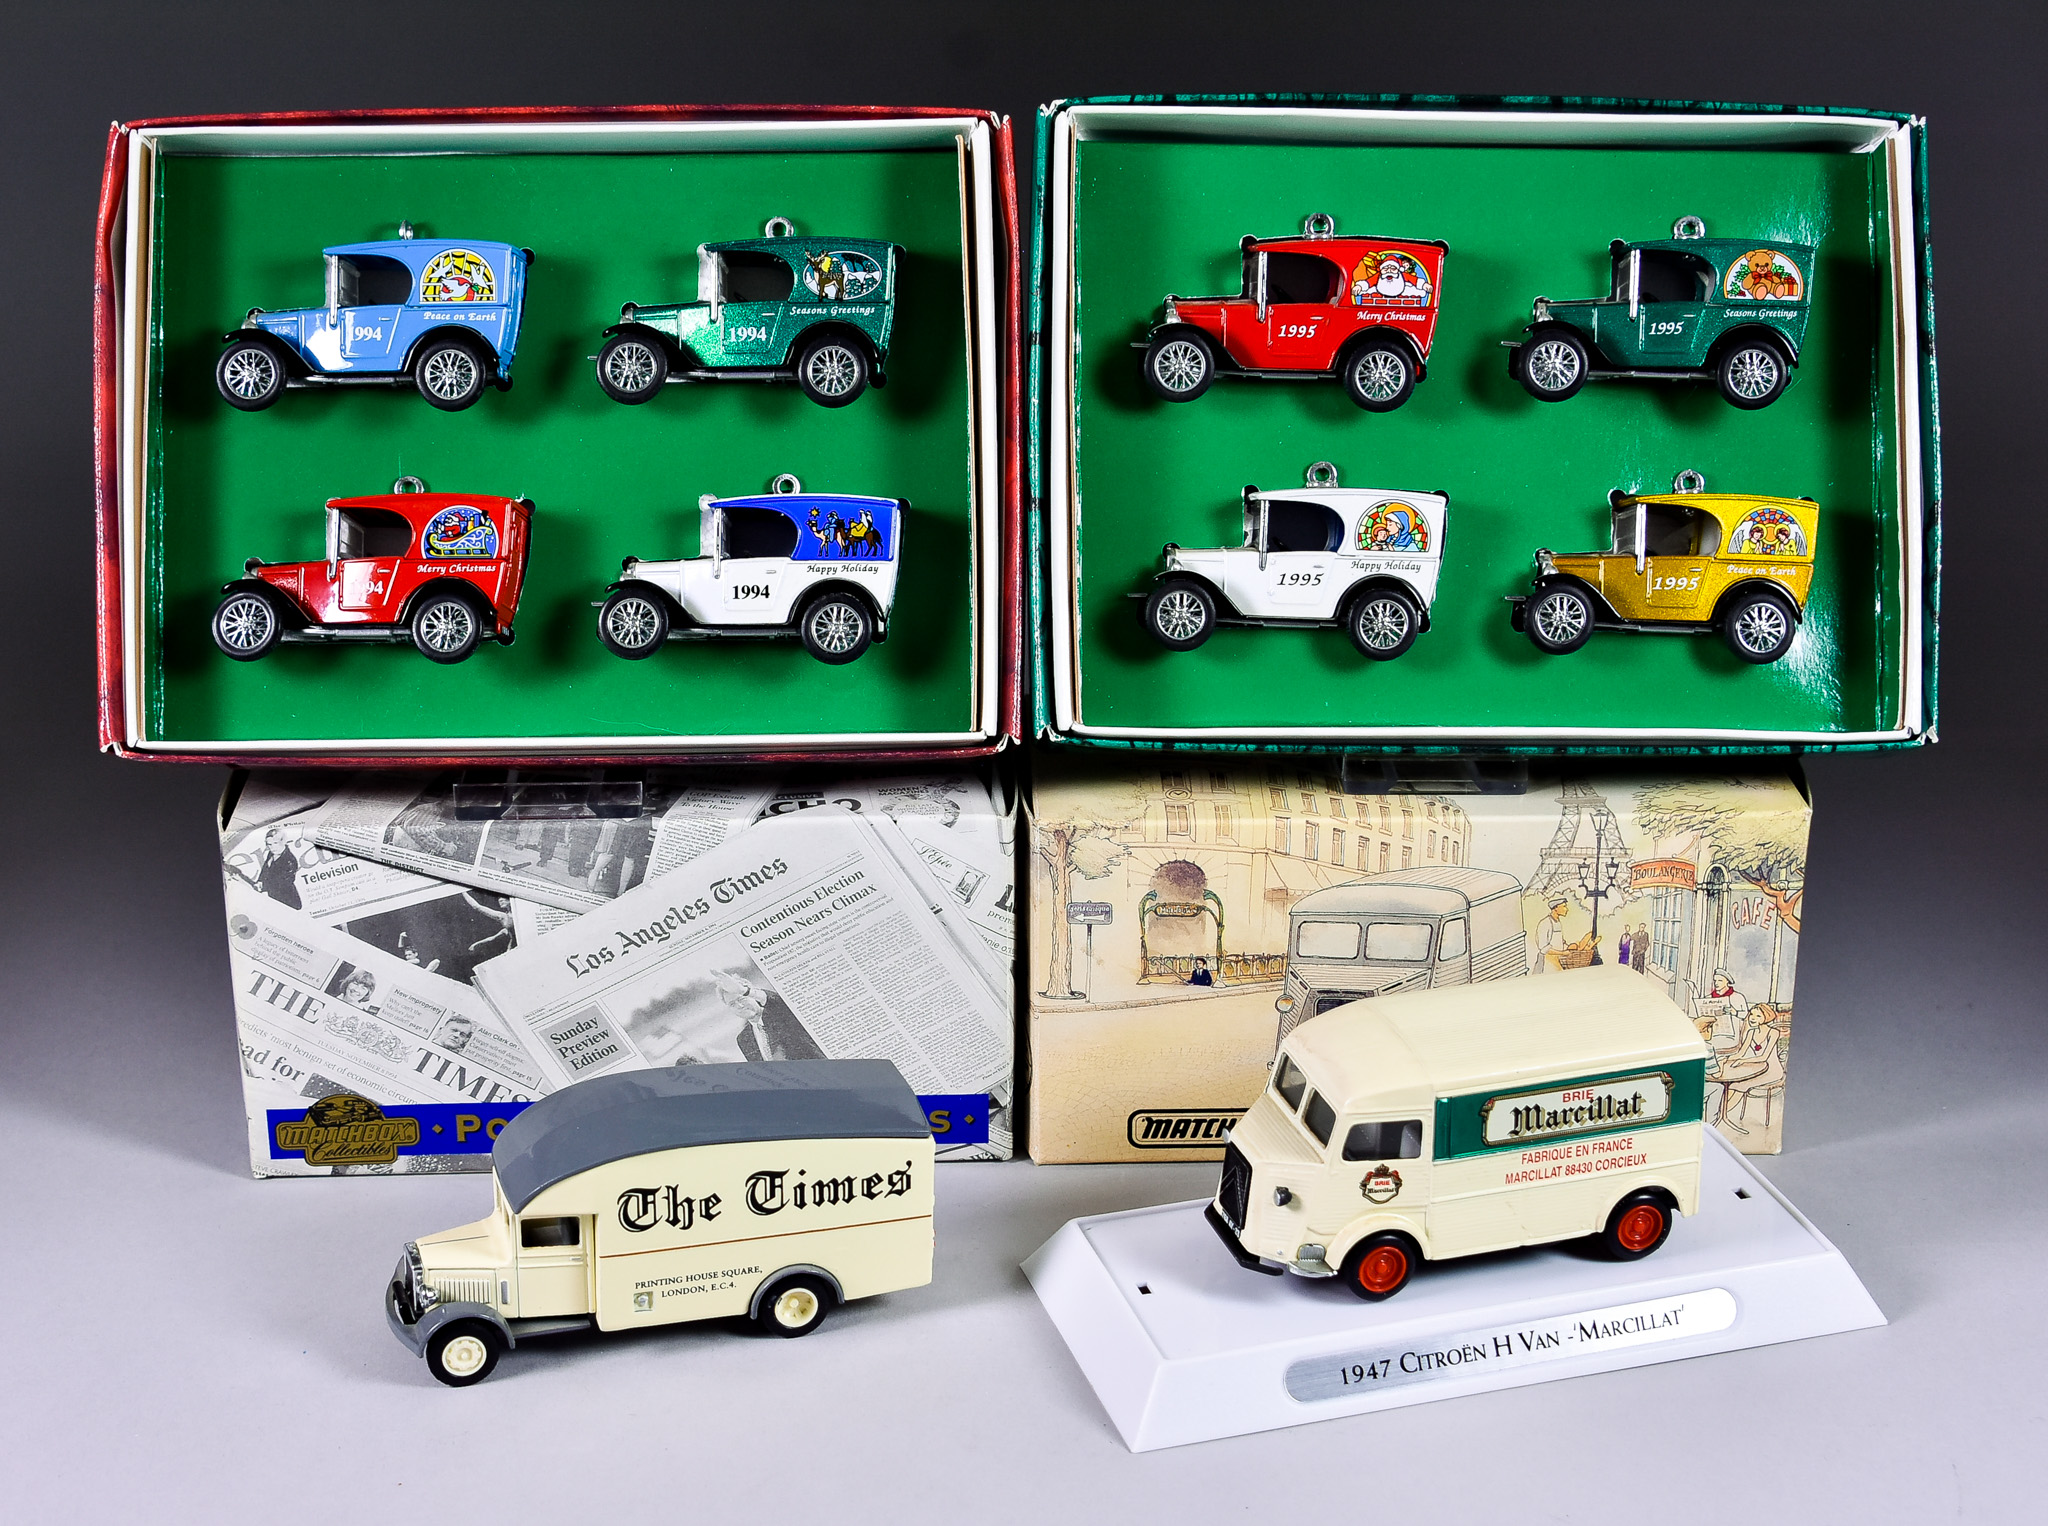 Eight Matchbox 'Collectibles' "Power of The Press" Models, including - 1931 Morris Van 'London